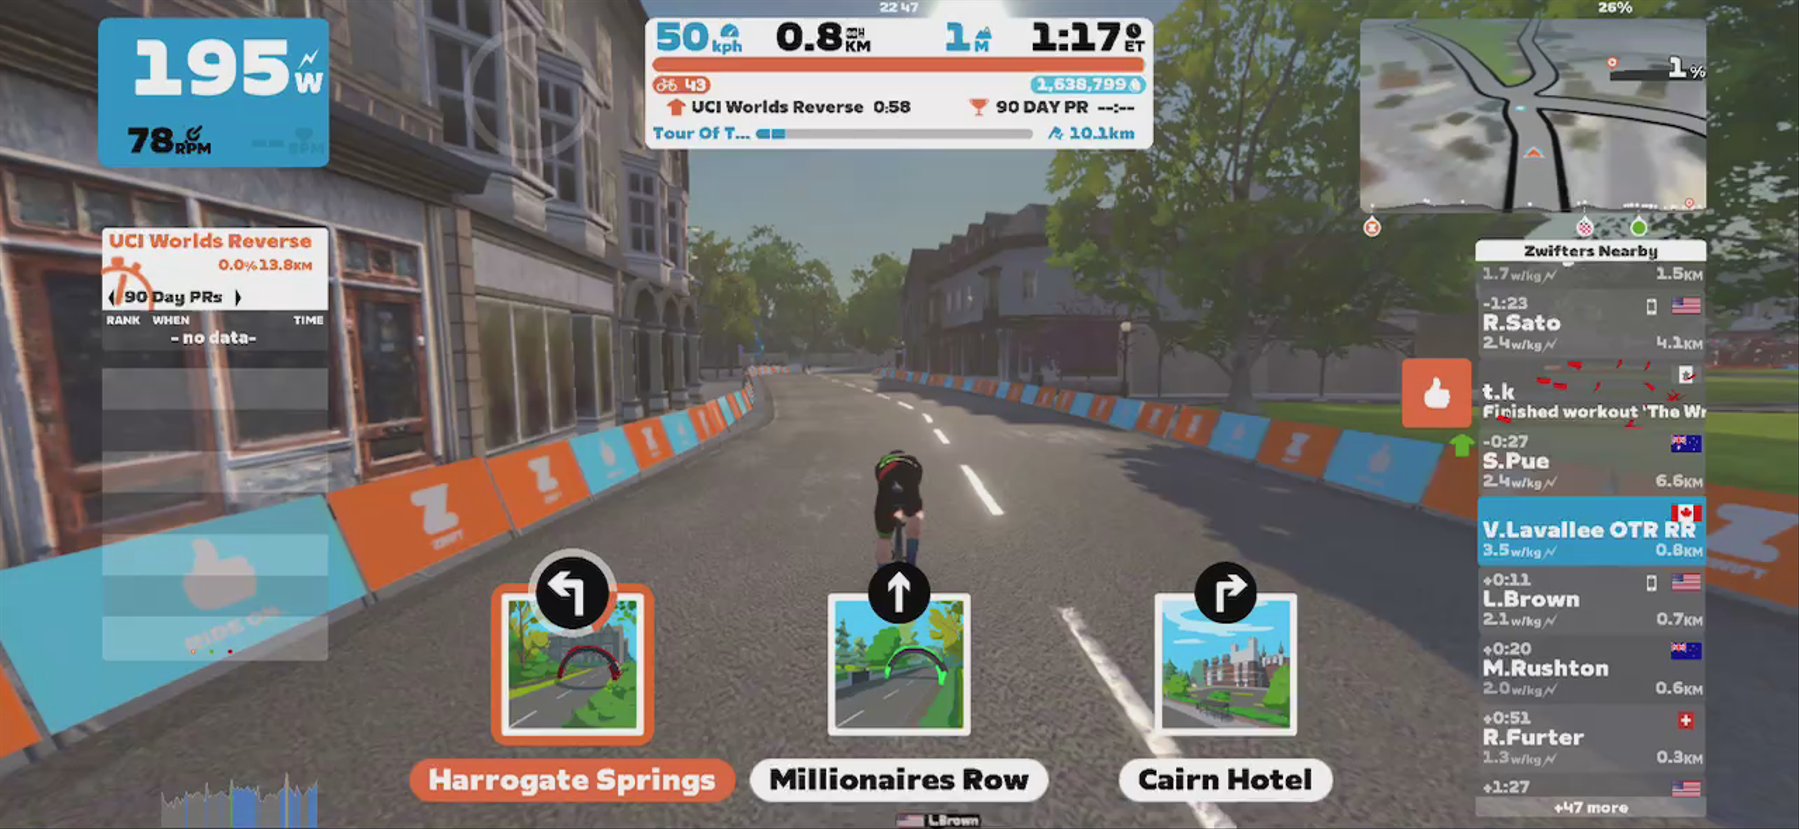 Zwift - Tour Of Tewit Well in Yorkshire